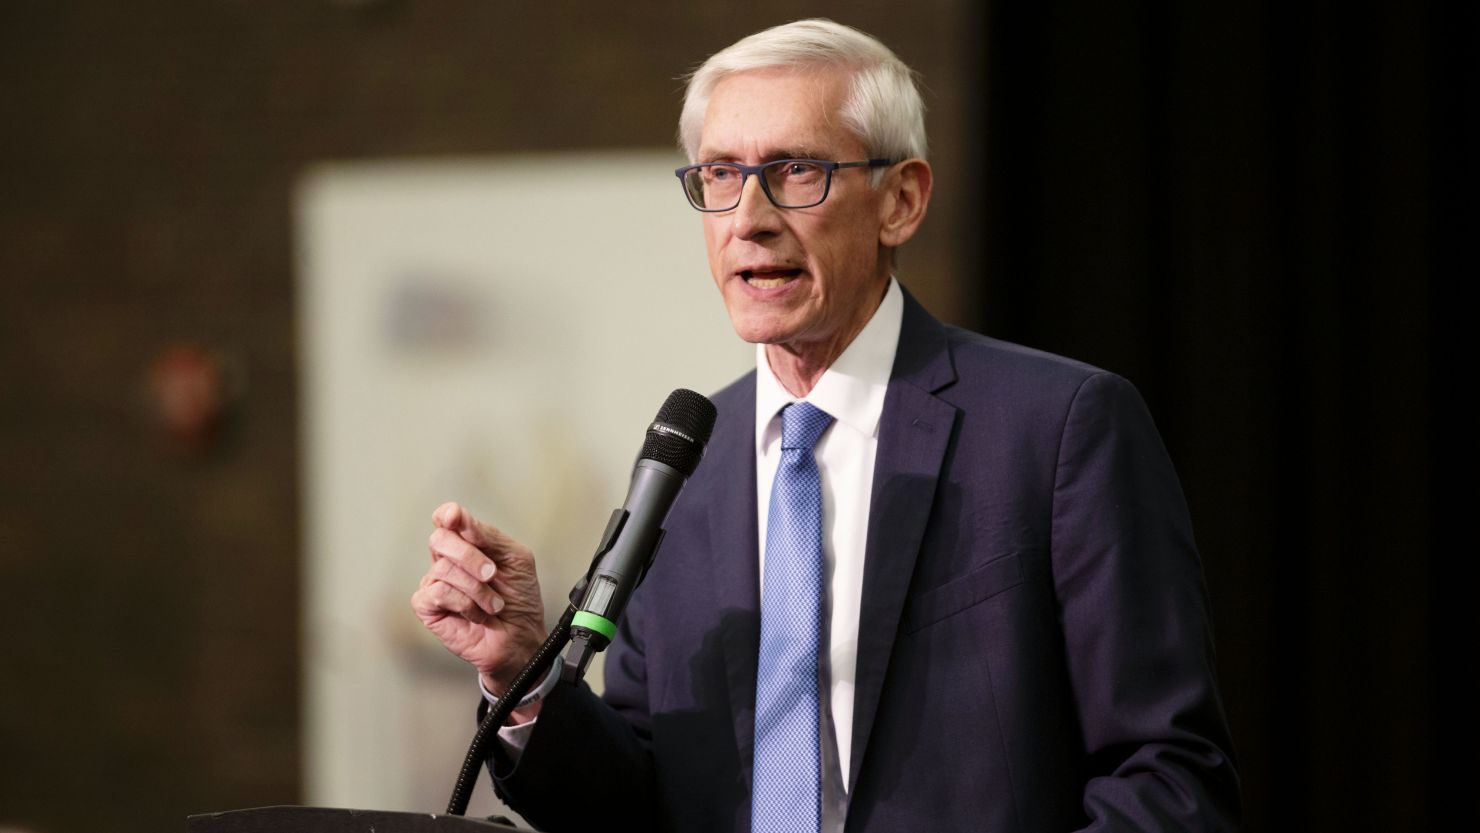 Tony Evers, then-Democratic nominee for governor of Wisconsin, speaks during a campaign rally in Milwaukee on Monday, October 22, 2018. 